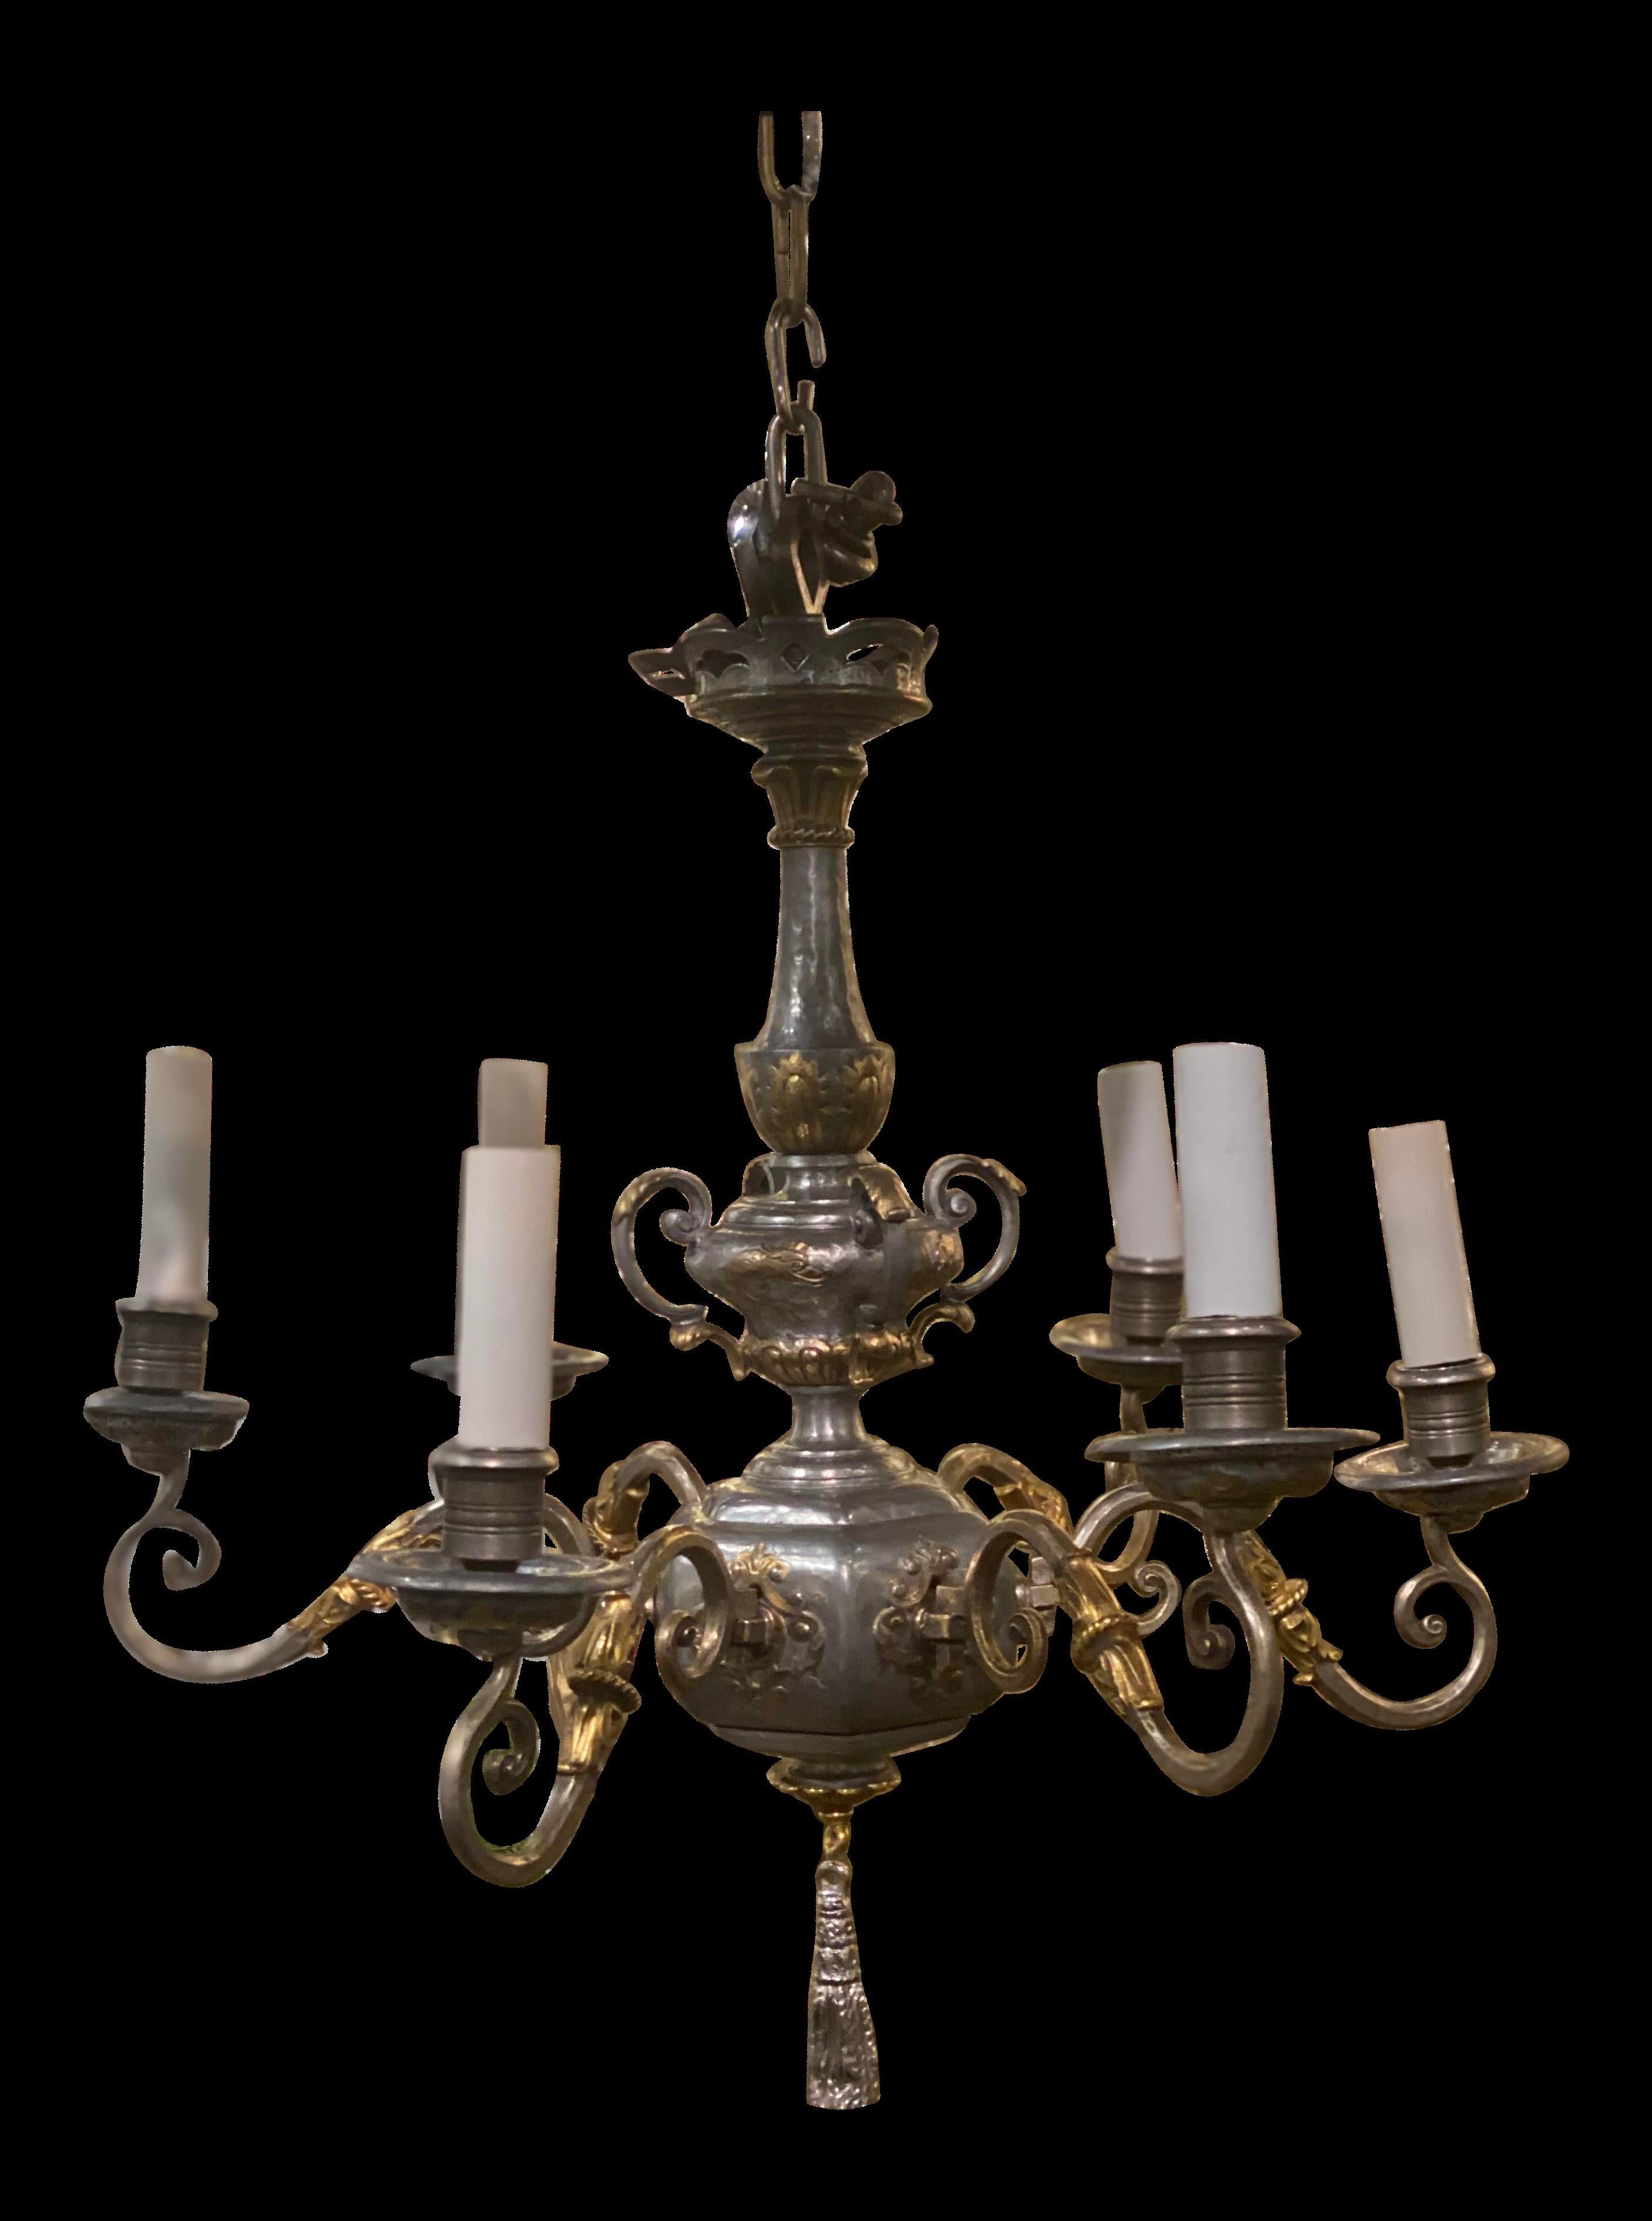 A circa 1920's Caldwell chandelier with gilded details ,matching sconces available.